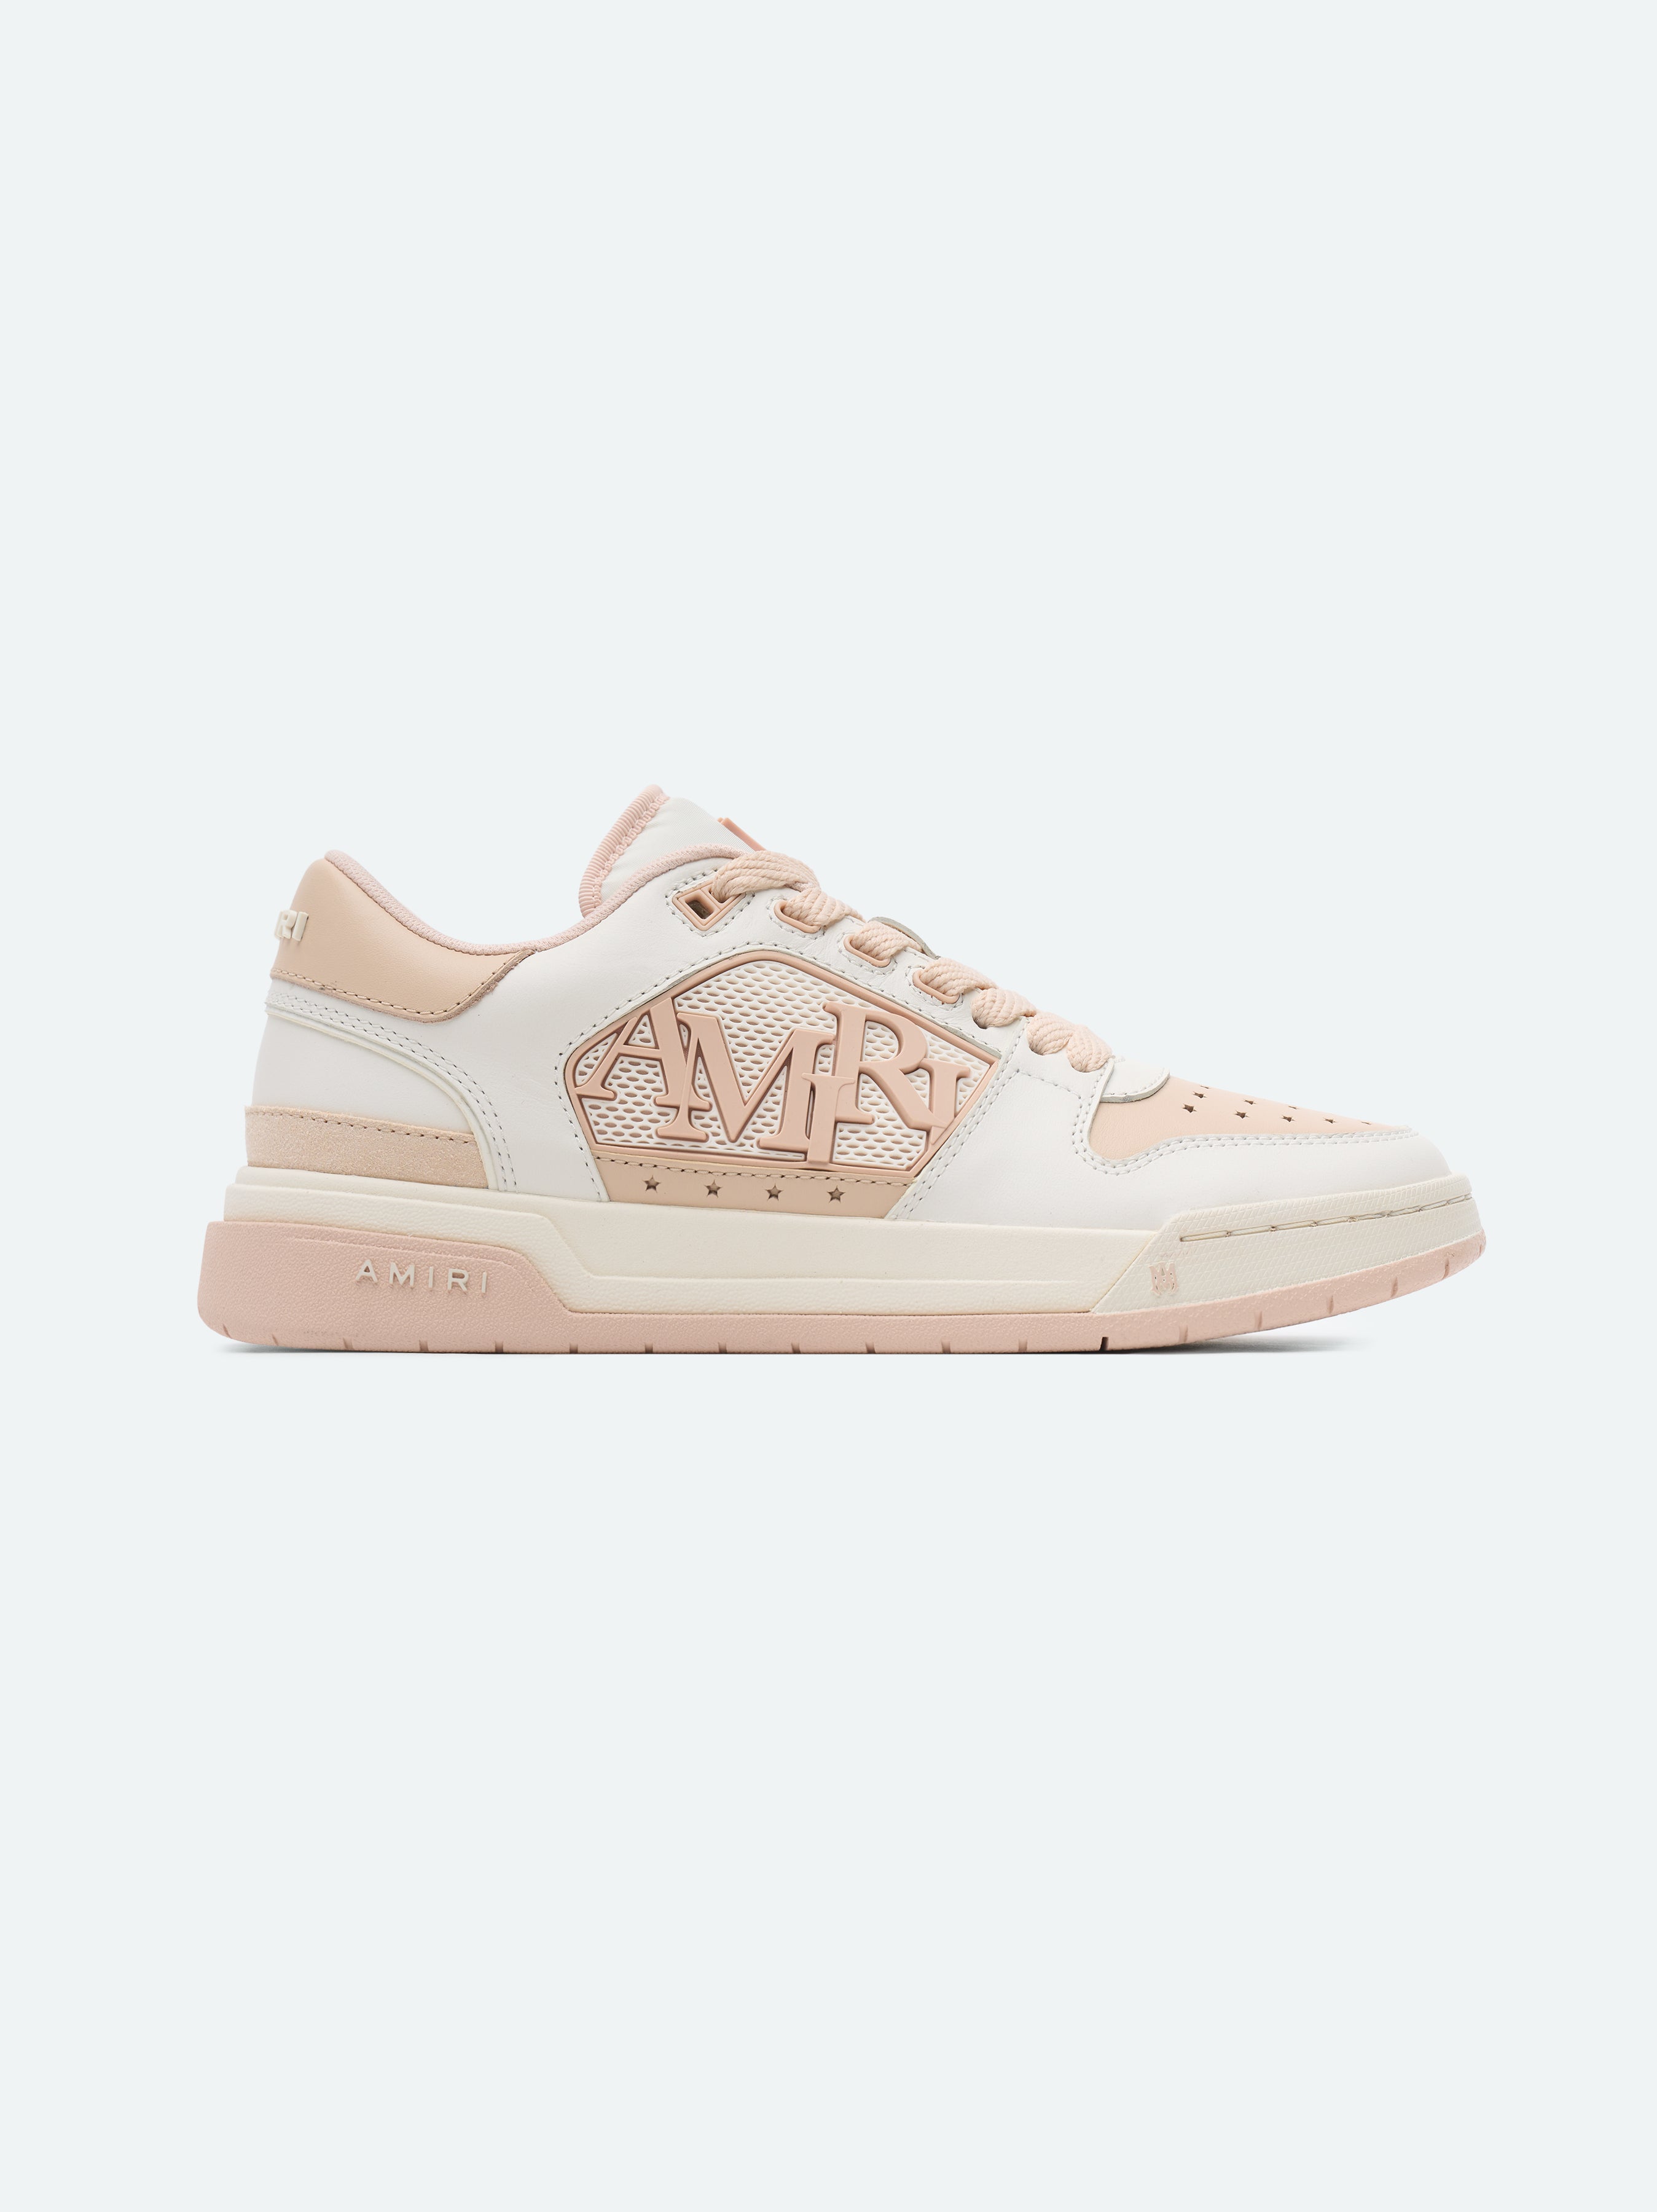 Product WOMEN - CLASSIC LOW - White Pink featured image